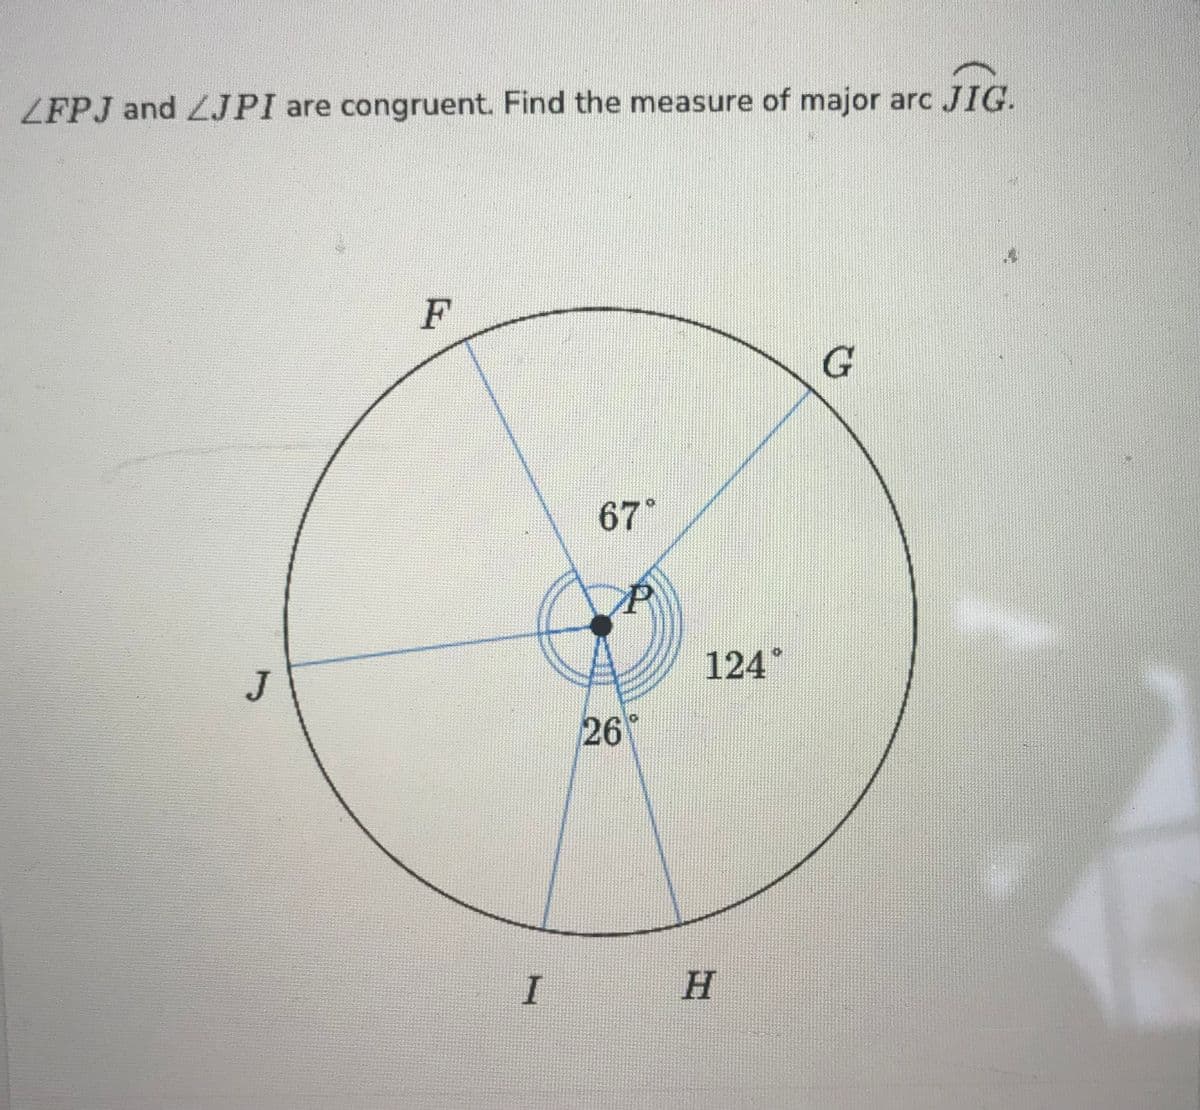 LFPJ and LJPI are congruent. Find the measure of major arc JIG.
J
F
I
67°
P
26
124
H
G